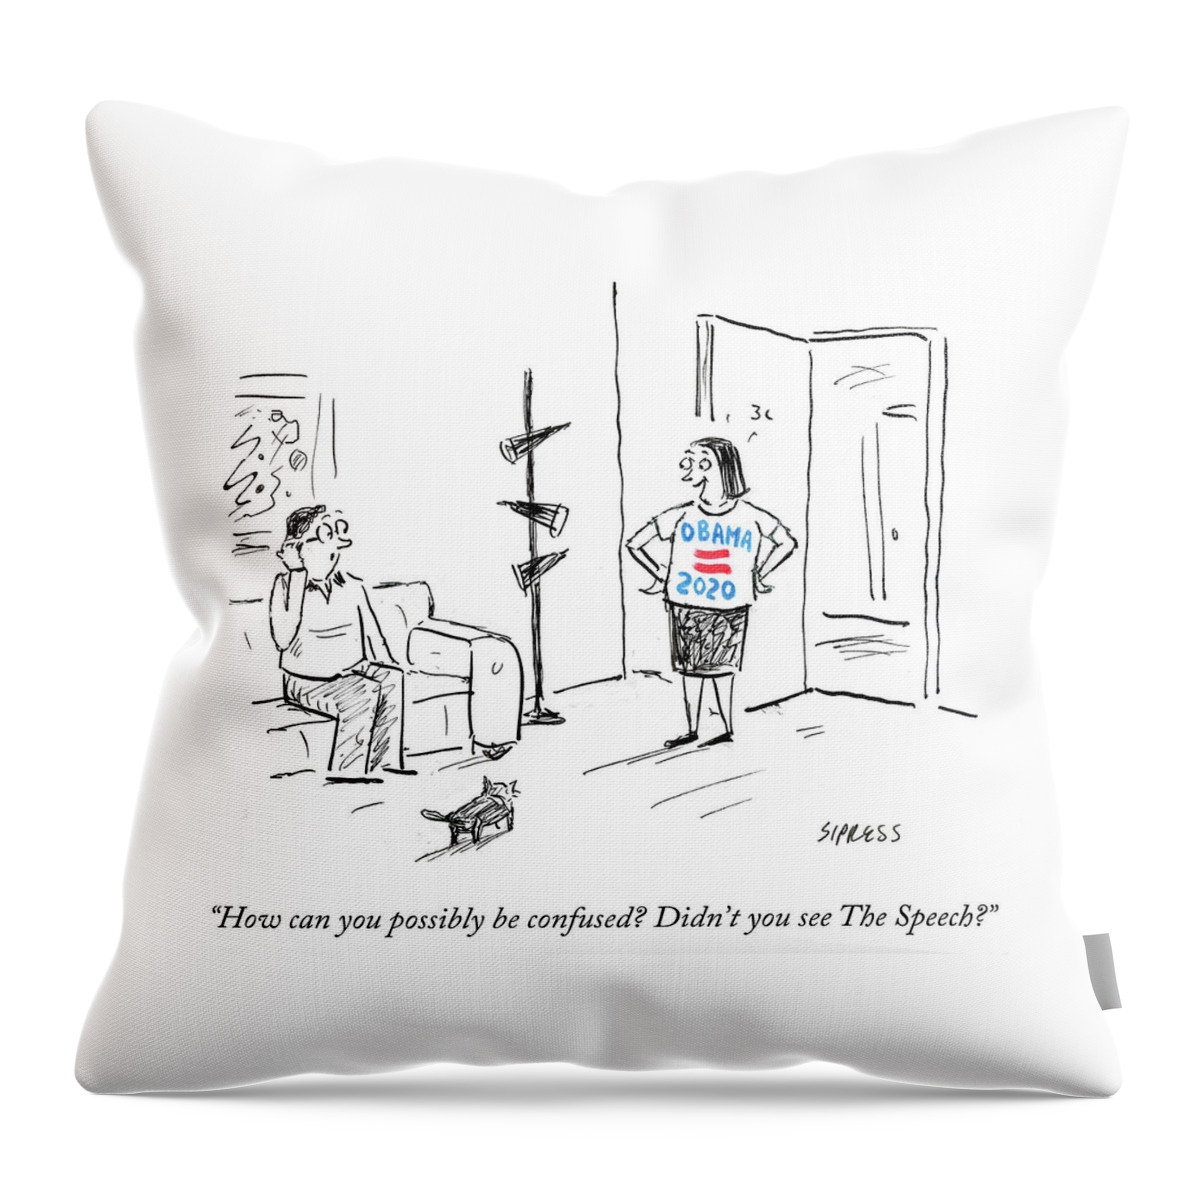 Didn't You See The Speech Throw Pillow